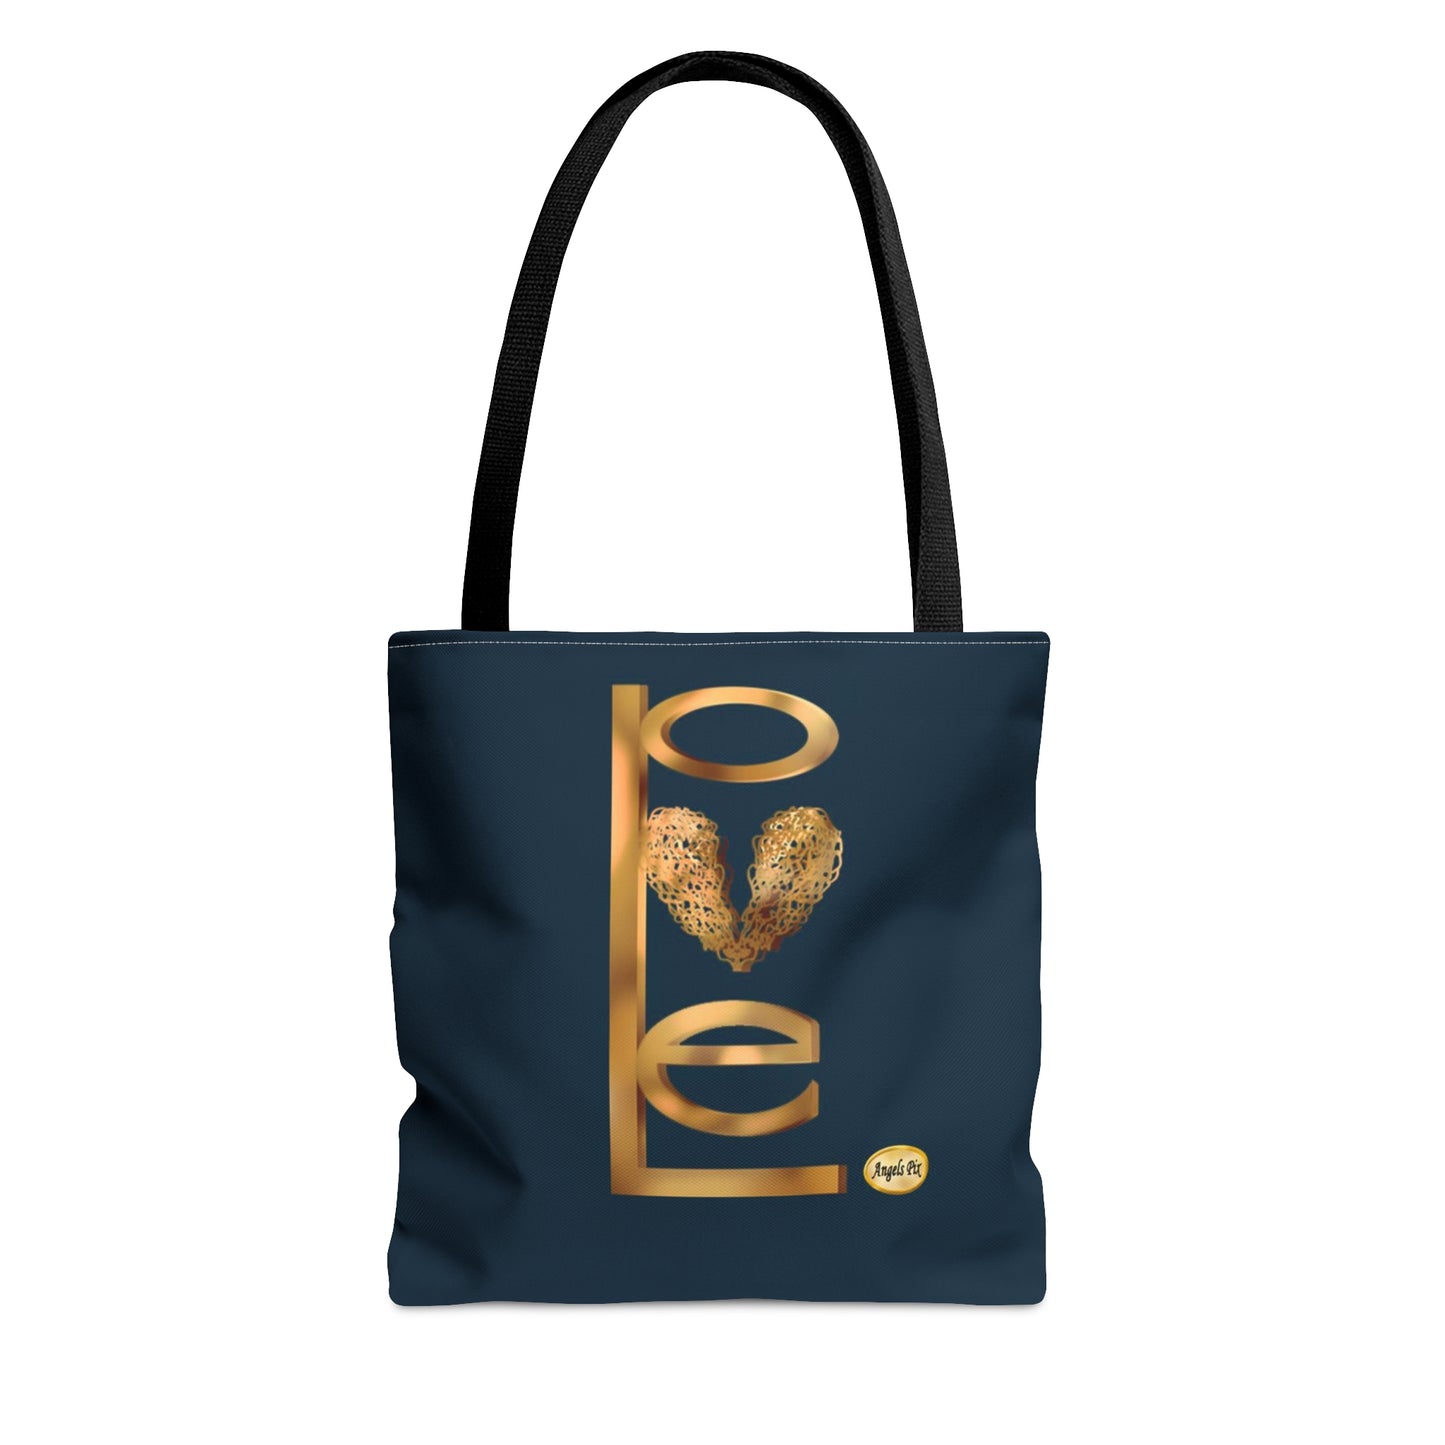 Love Gold on Black Strapped Tote